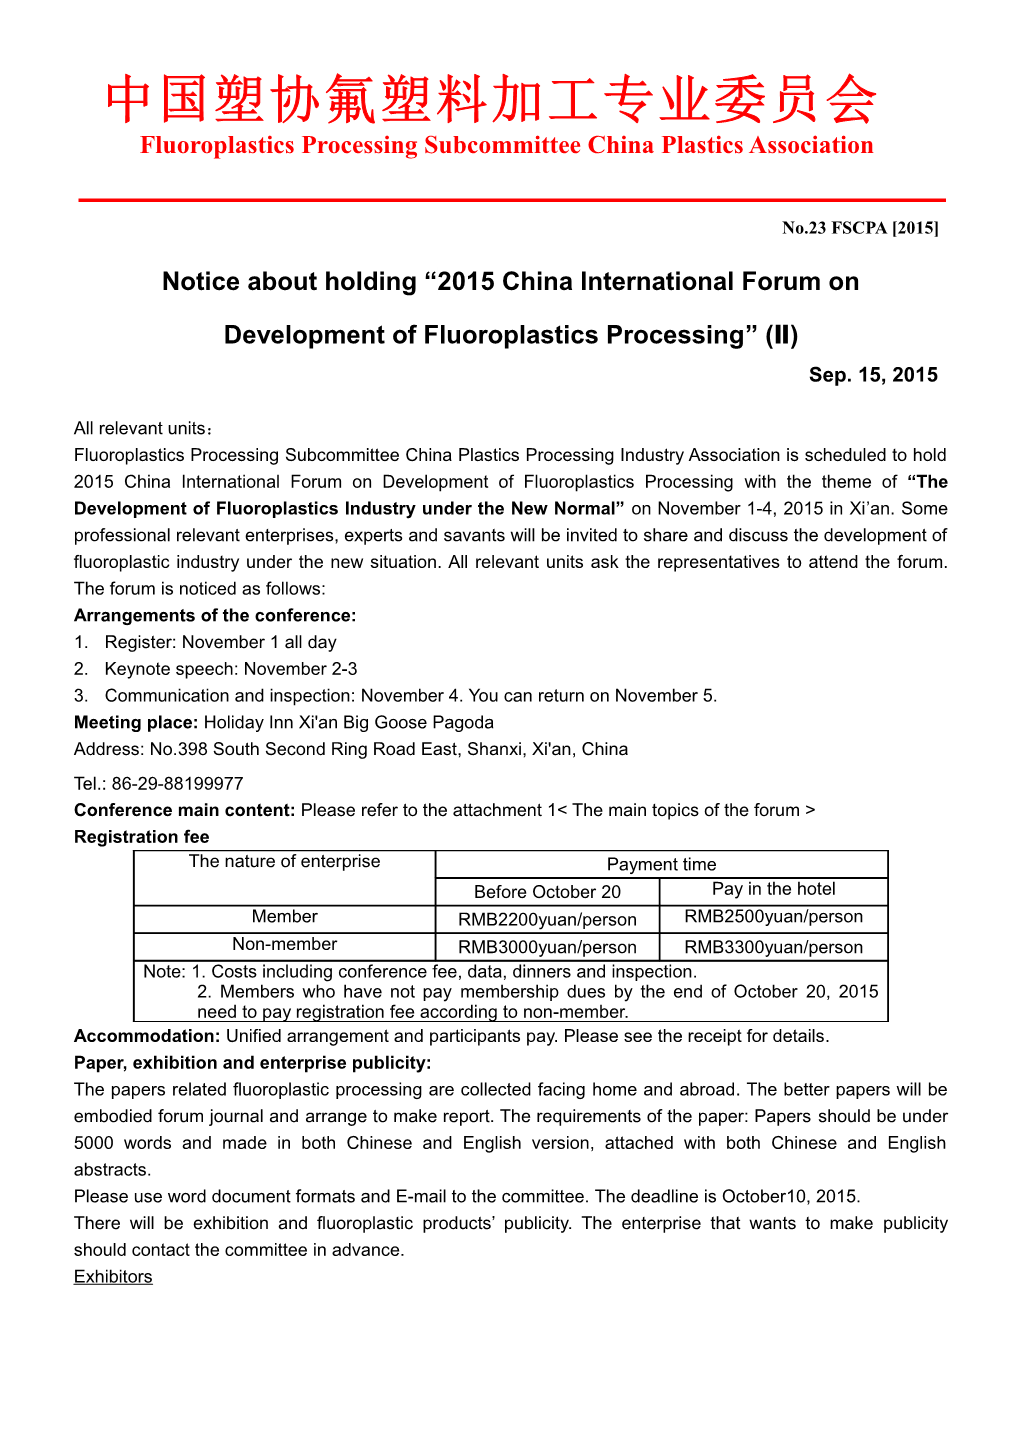 Notice About Holding 2015China International Forum On